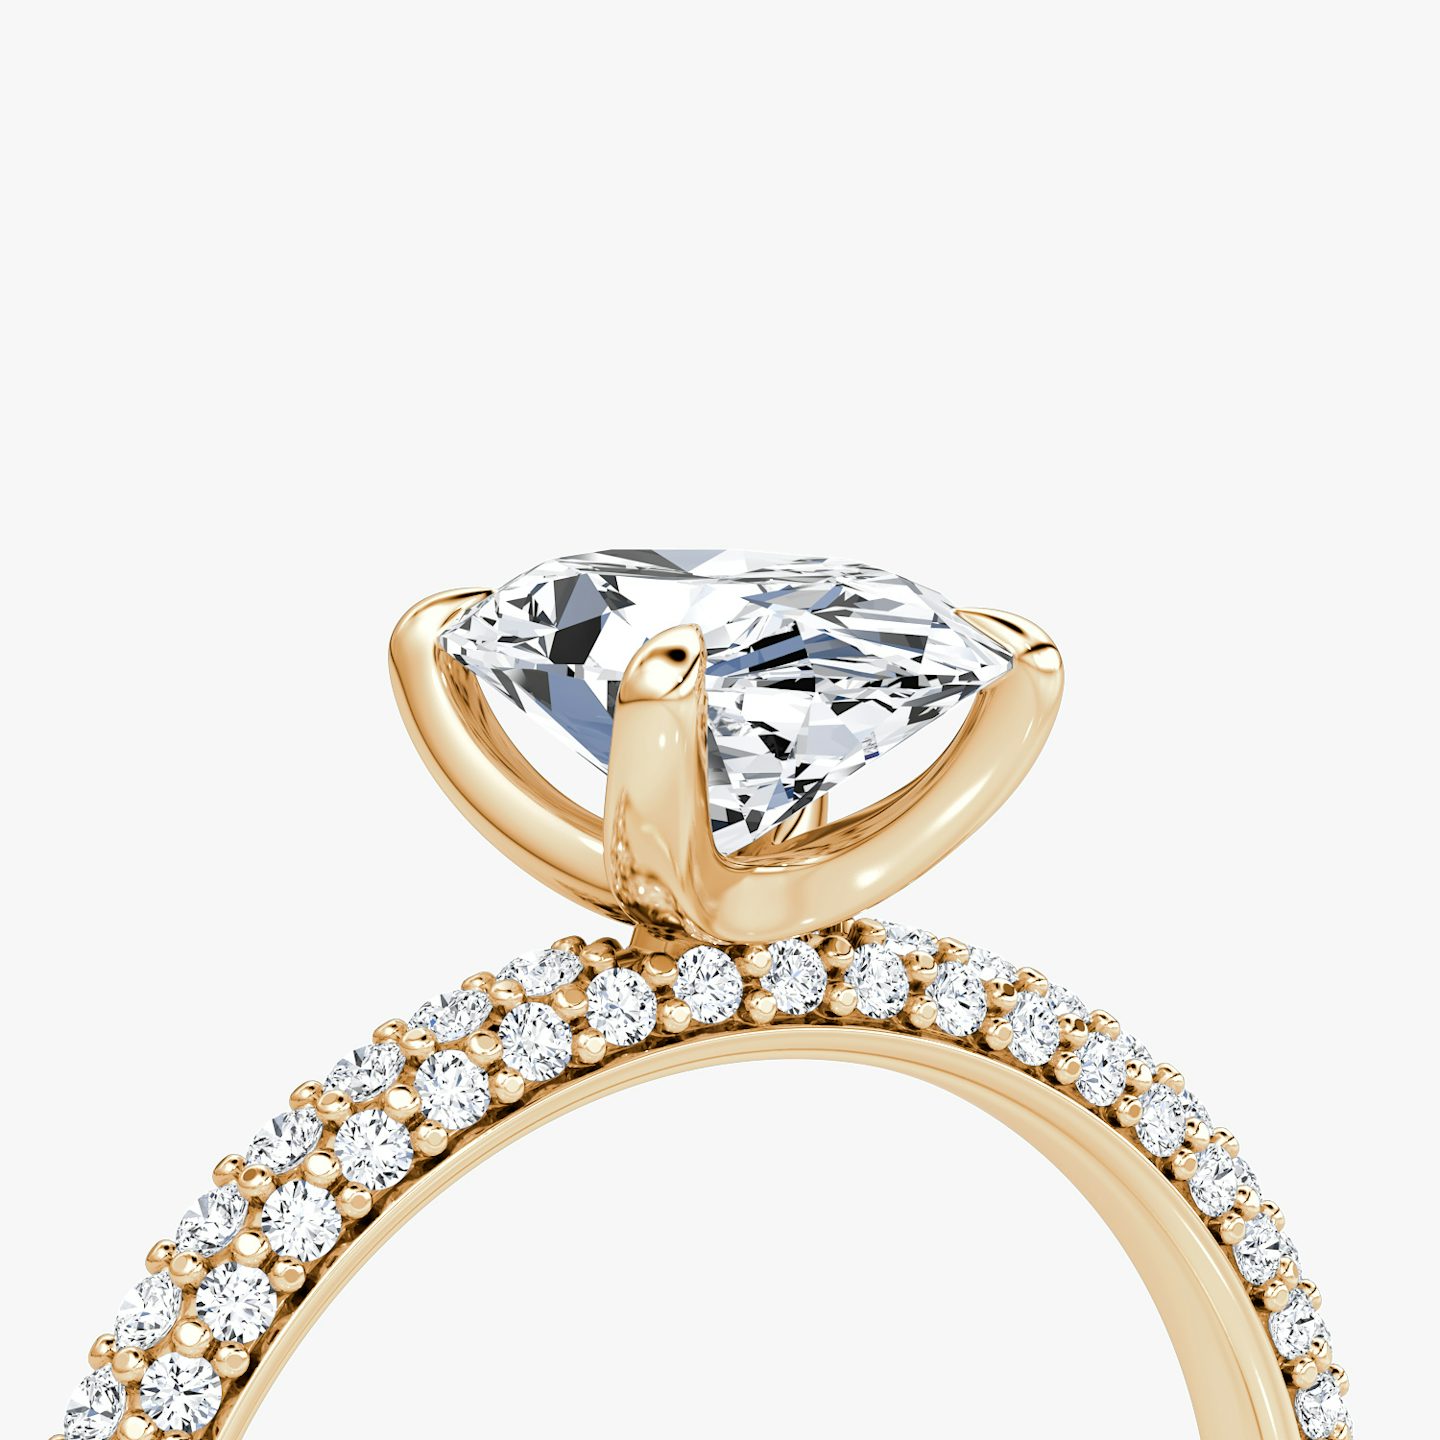 The Pavé Dome | oval | 14k | rose-gold | diamondOrientation: vertical | caratWeight: other